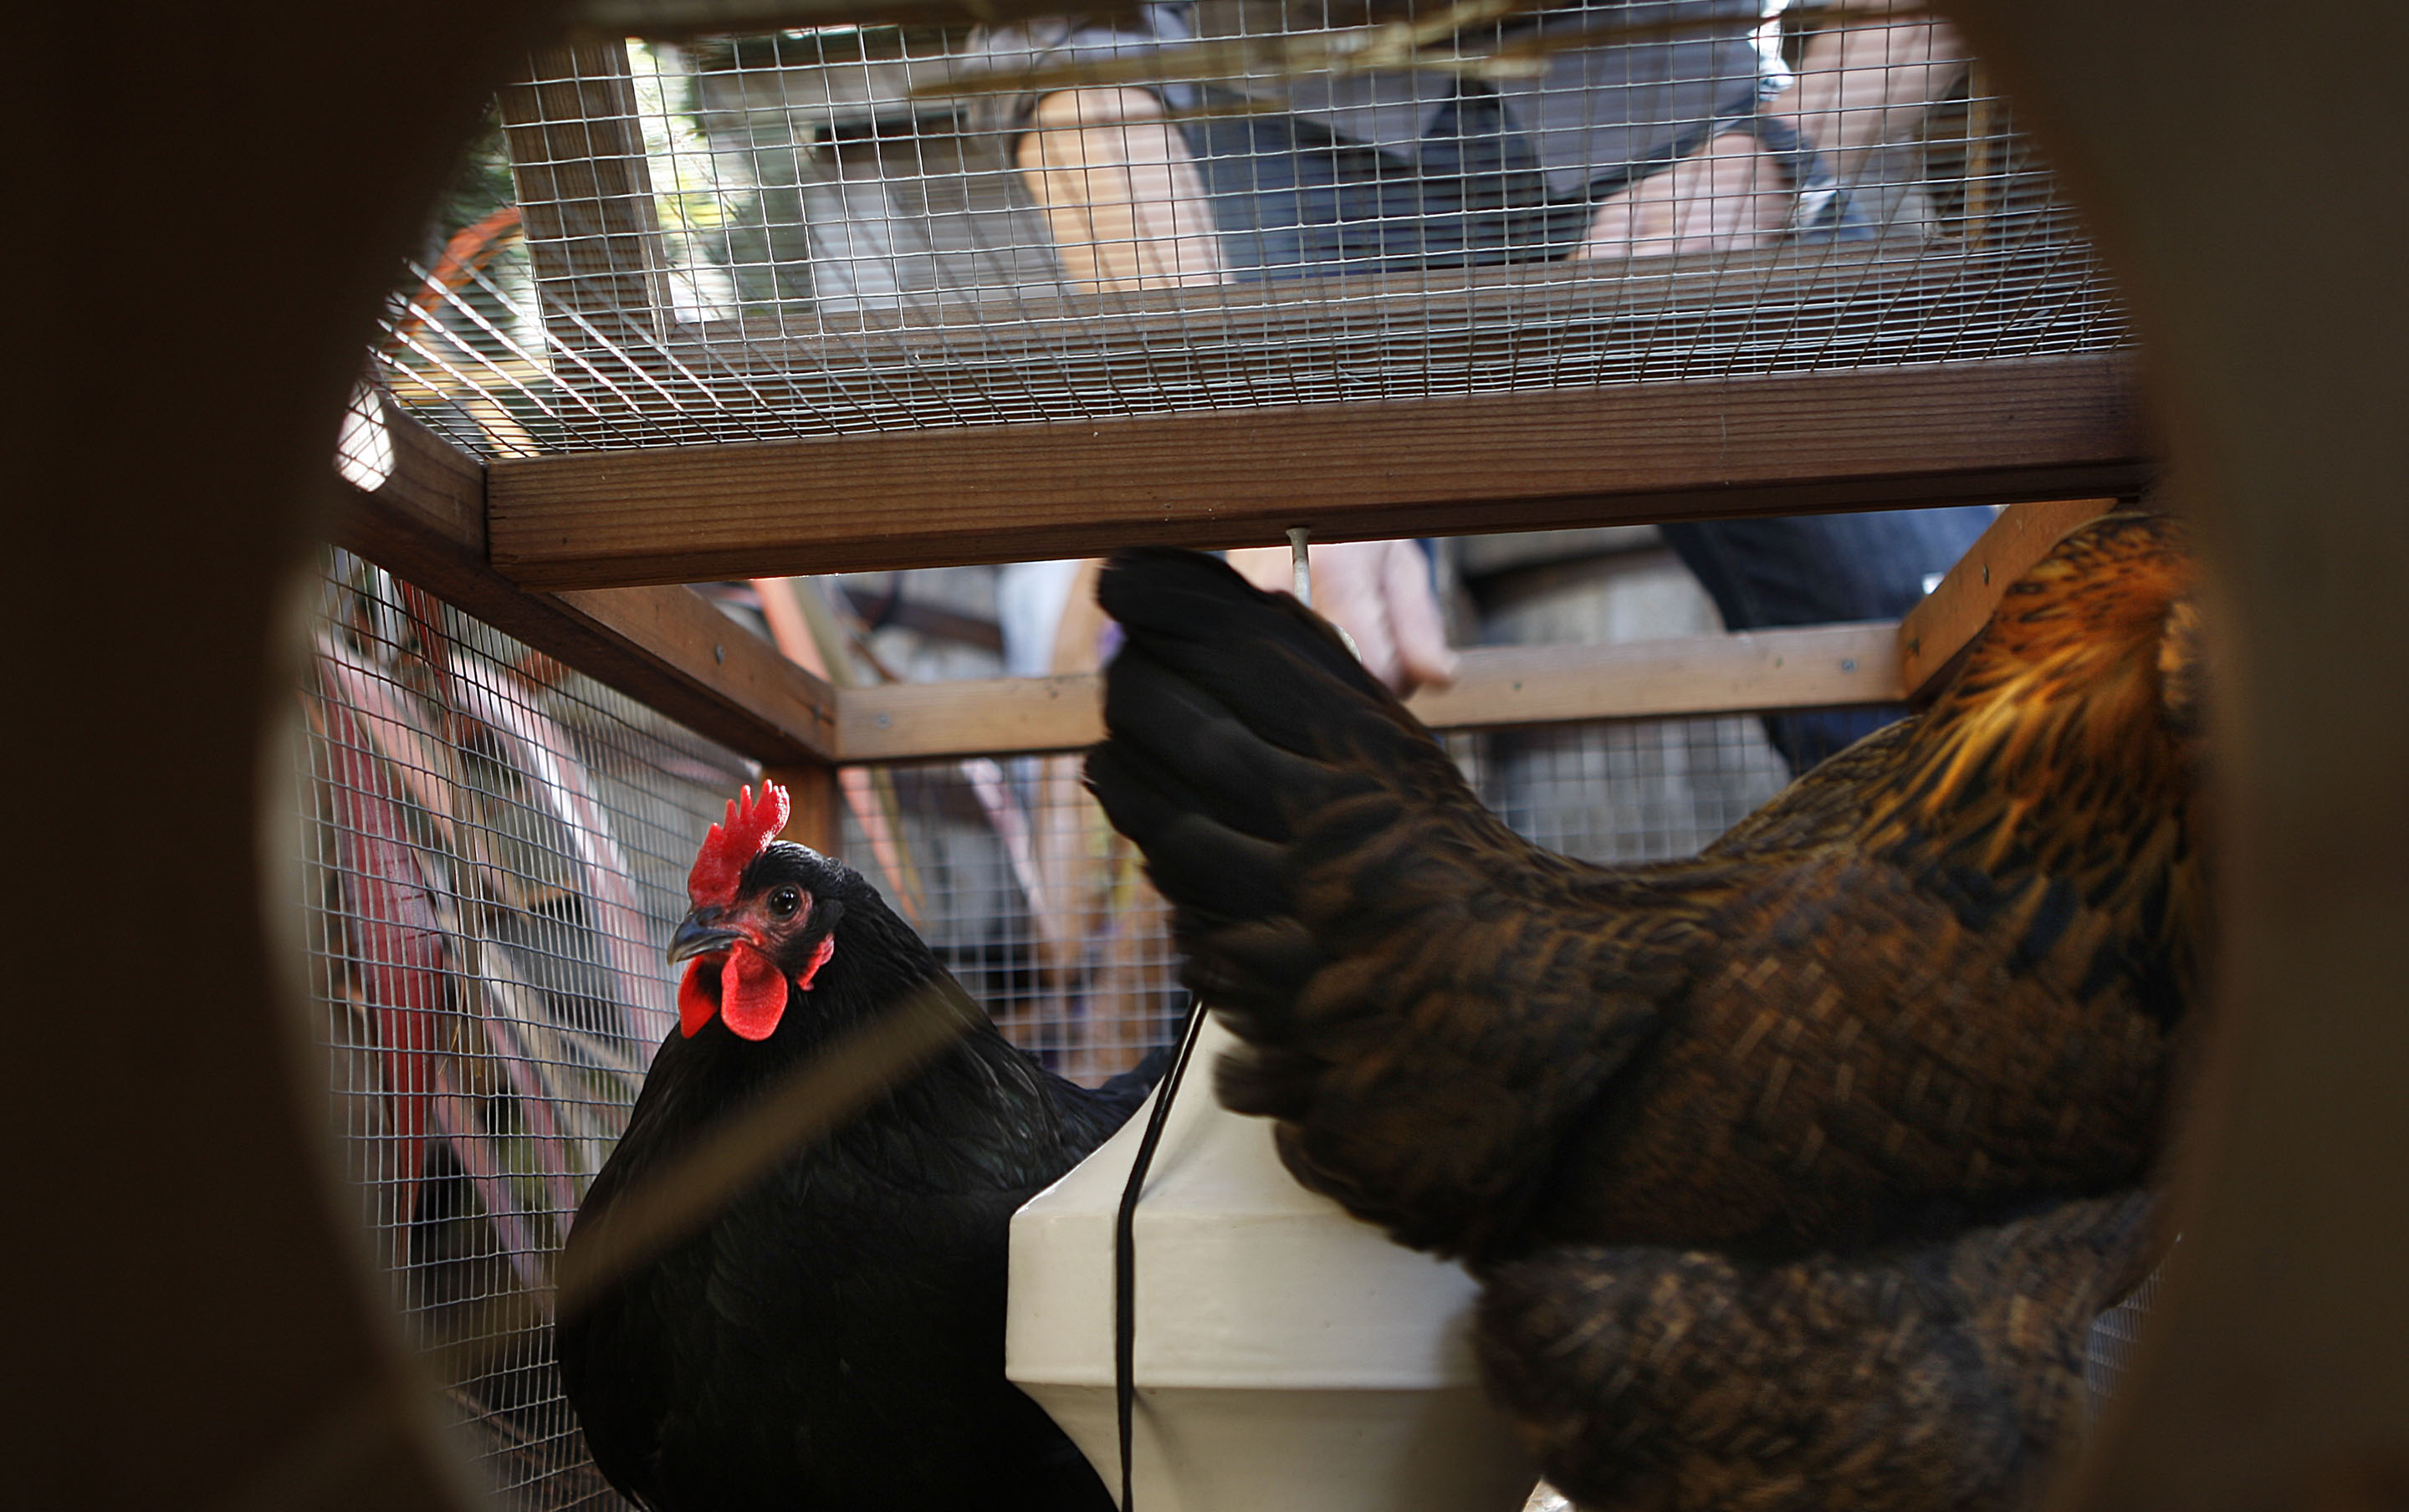 With the price of Grade A eggs up 138% since last year, some families are turning to backyard chicken coops. (Liz Hafalia––San Francisco Chronicle via Getty Images)